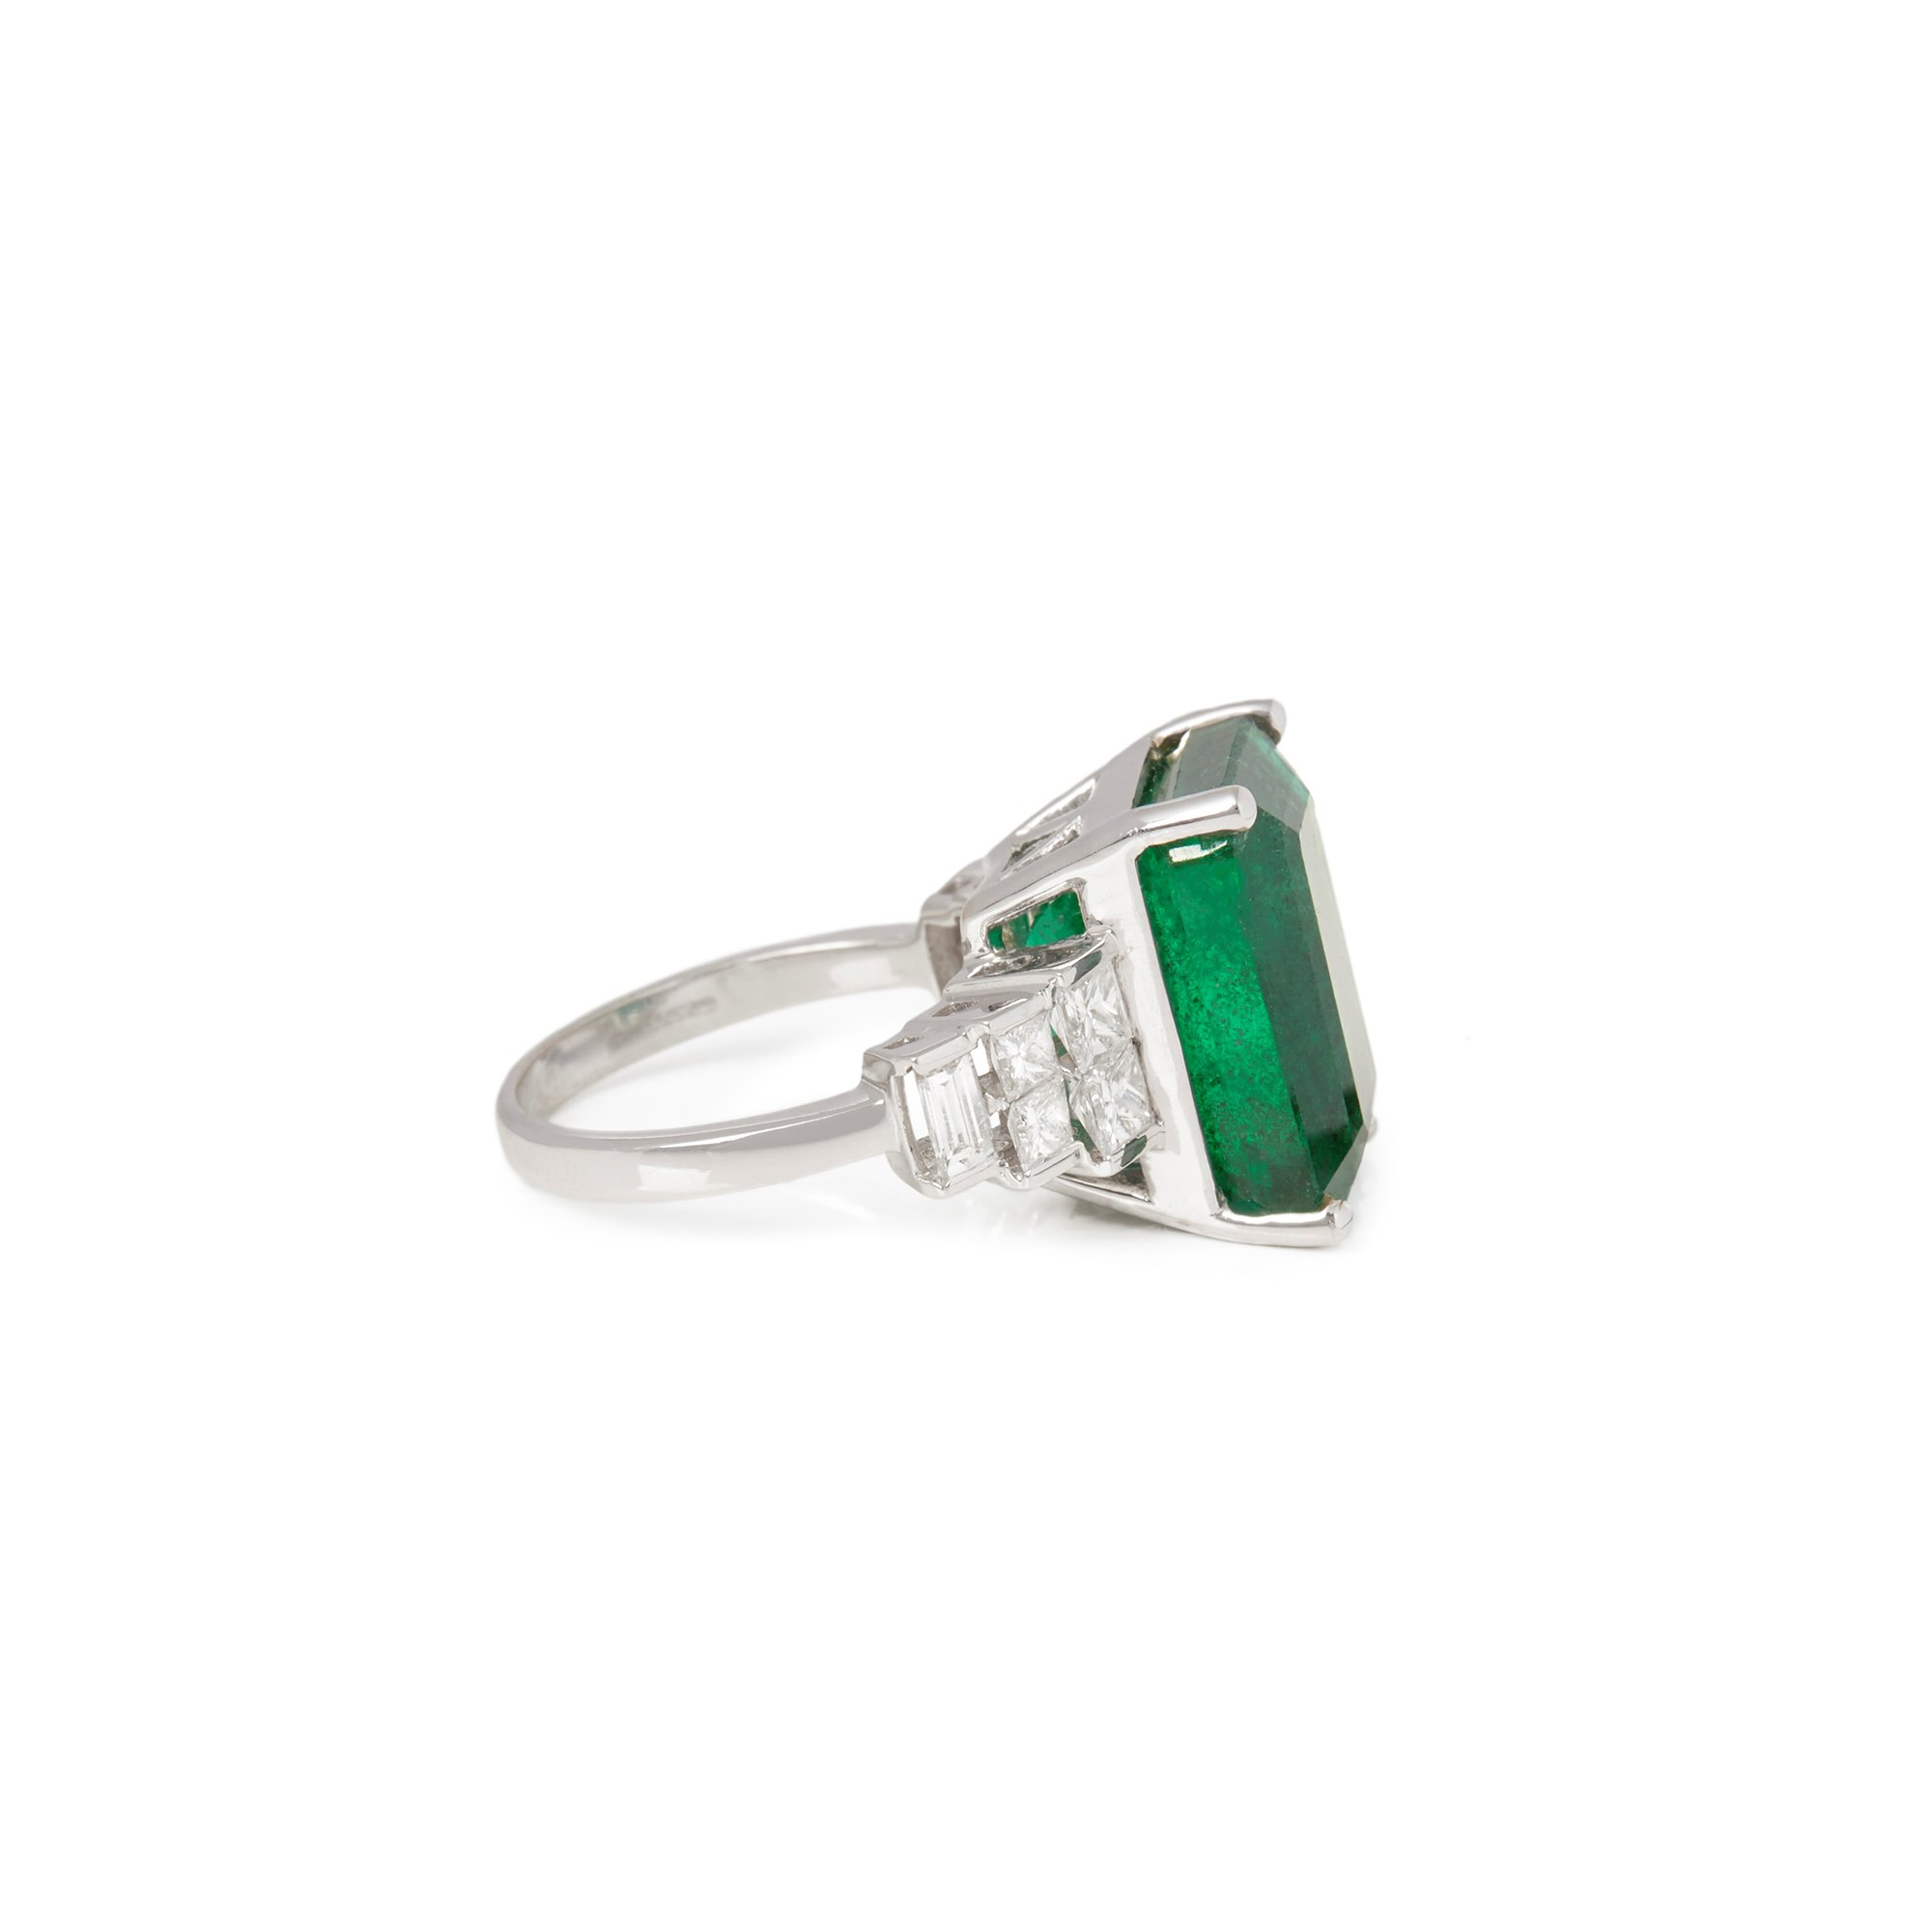 David Jerome Certified 4.8ct Untreated Colombian Emerald Cut Emerald and Diamond Ring